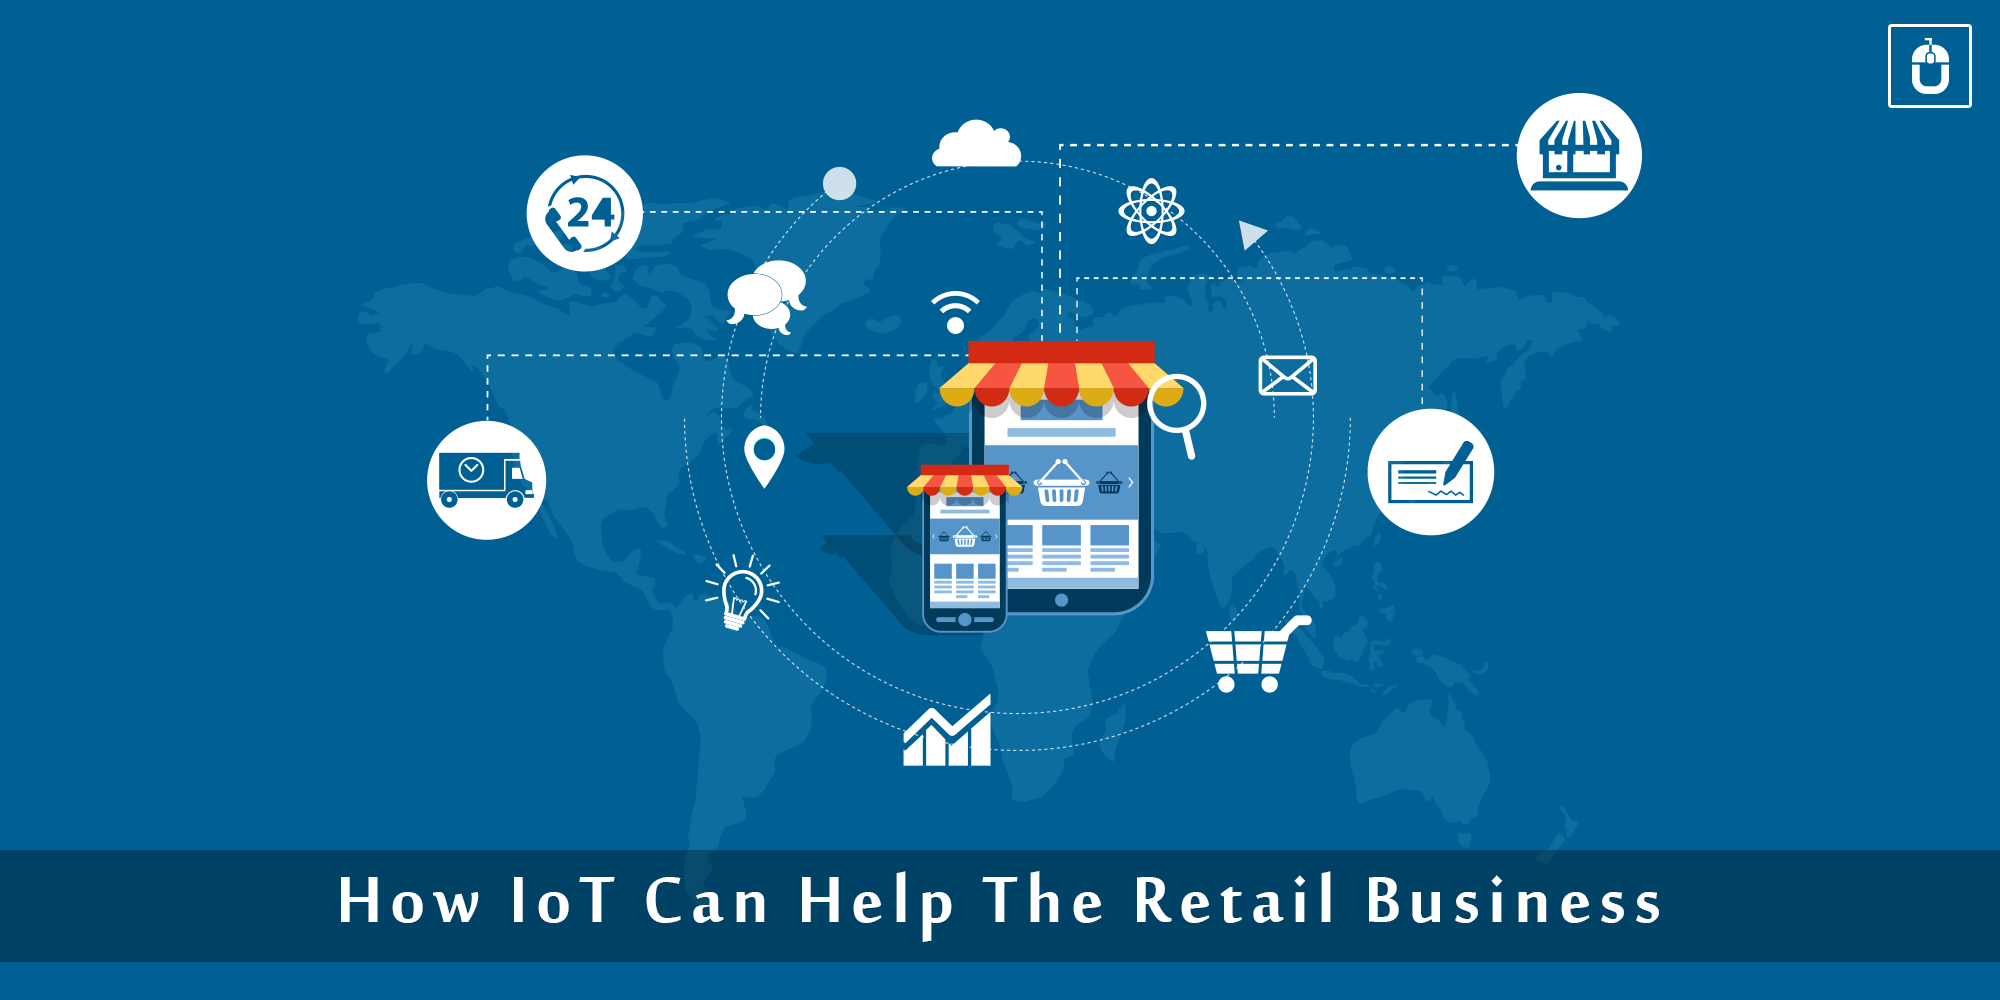 WHY RETAIL BUSINESSES MUST VOUCH FOR IoT? (Updated)